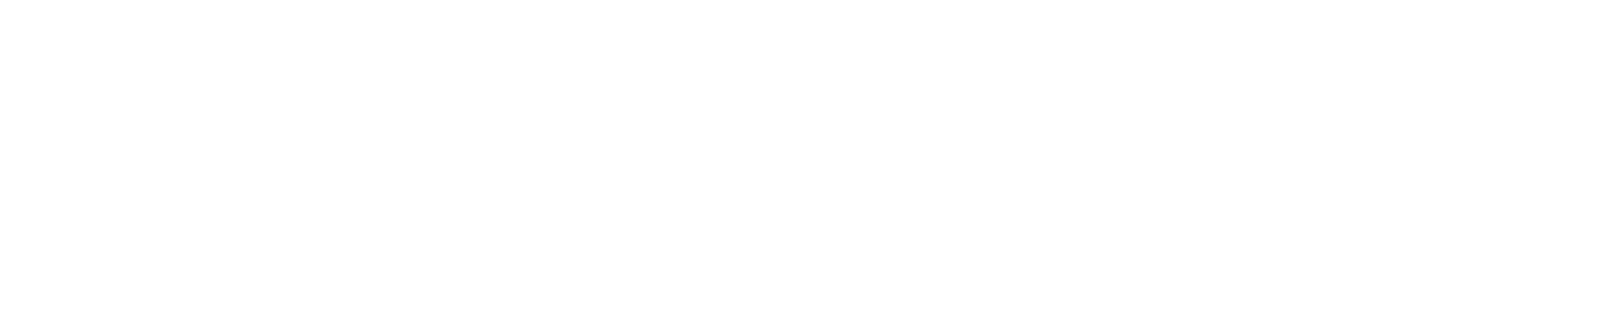 2016 Dare To Dream Directed By Joe Jaeger and Mike Reed